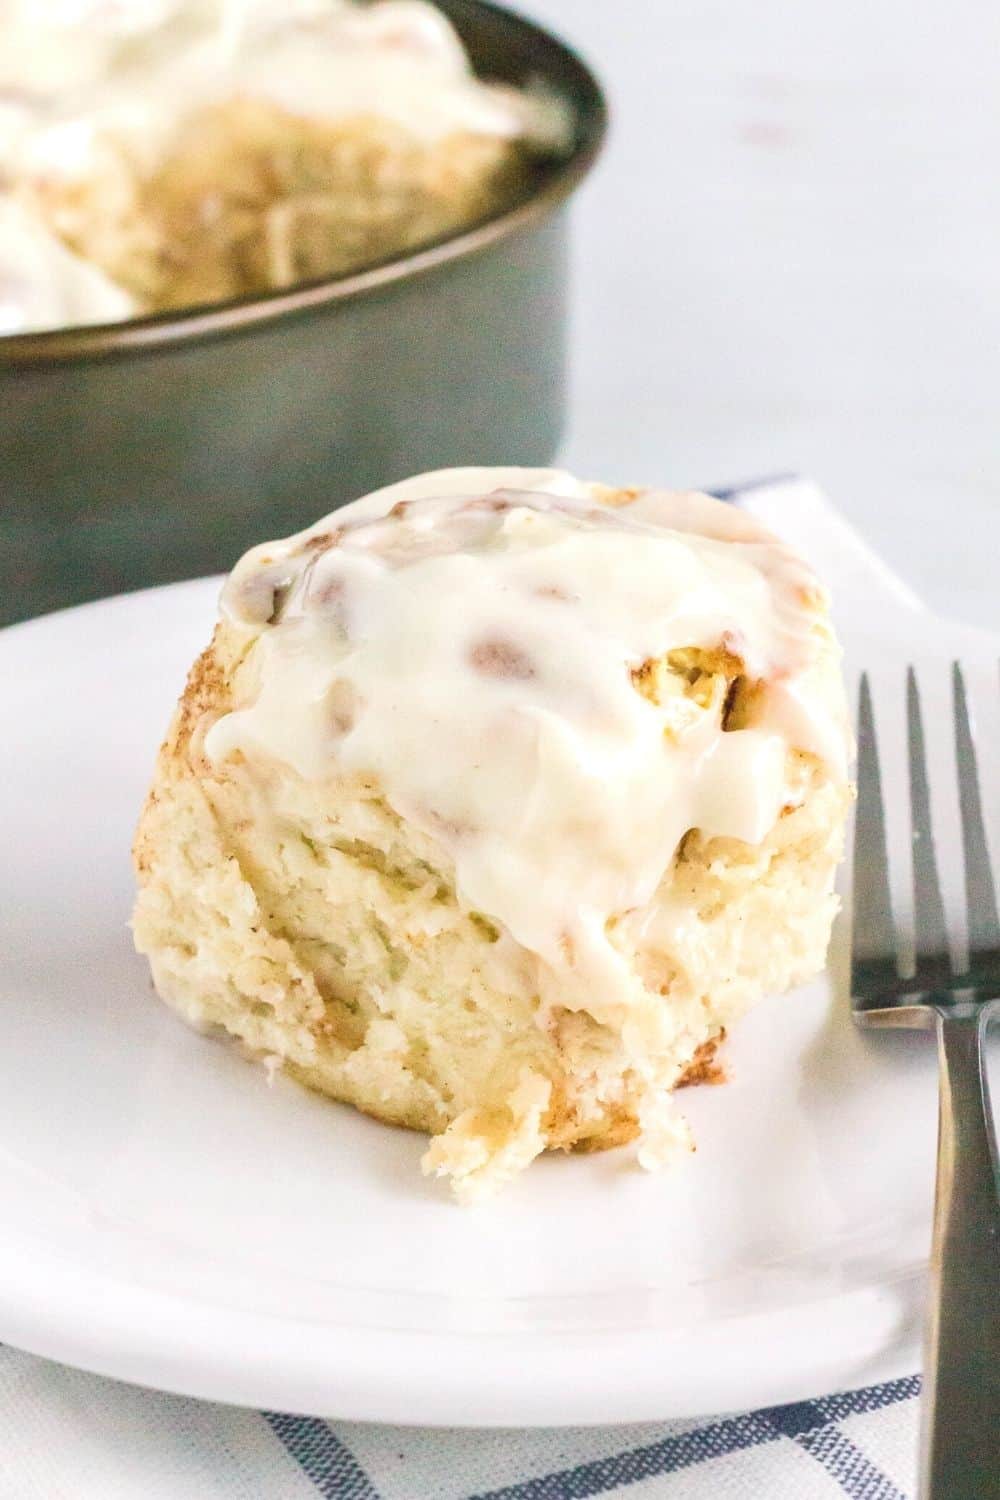 fluffy homemade cinnamon roll on a white plate with a fork next to it. The pan of cinnamon rolls is in the background.